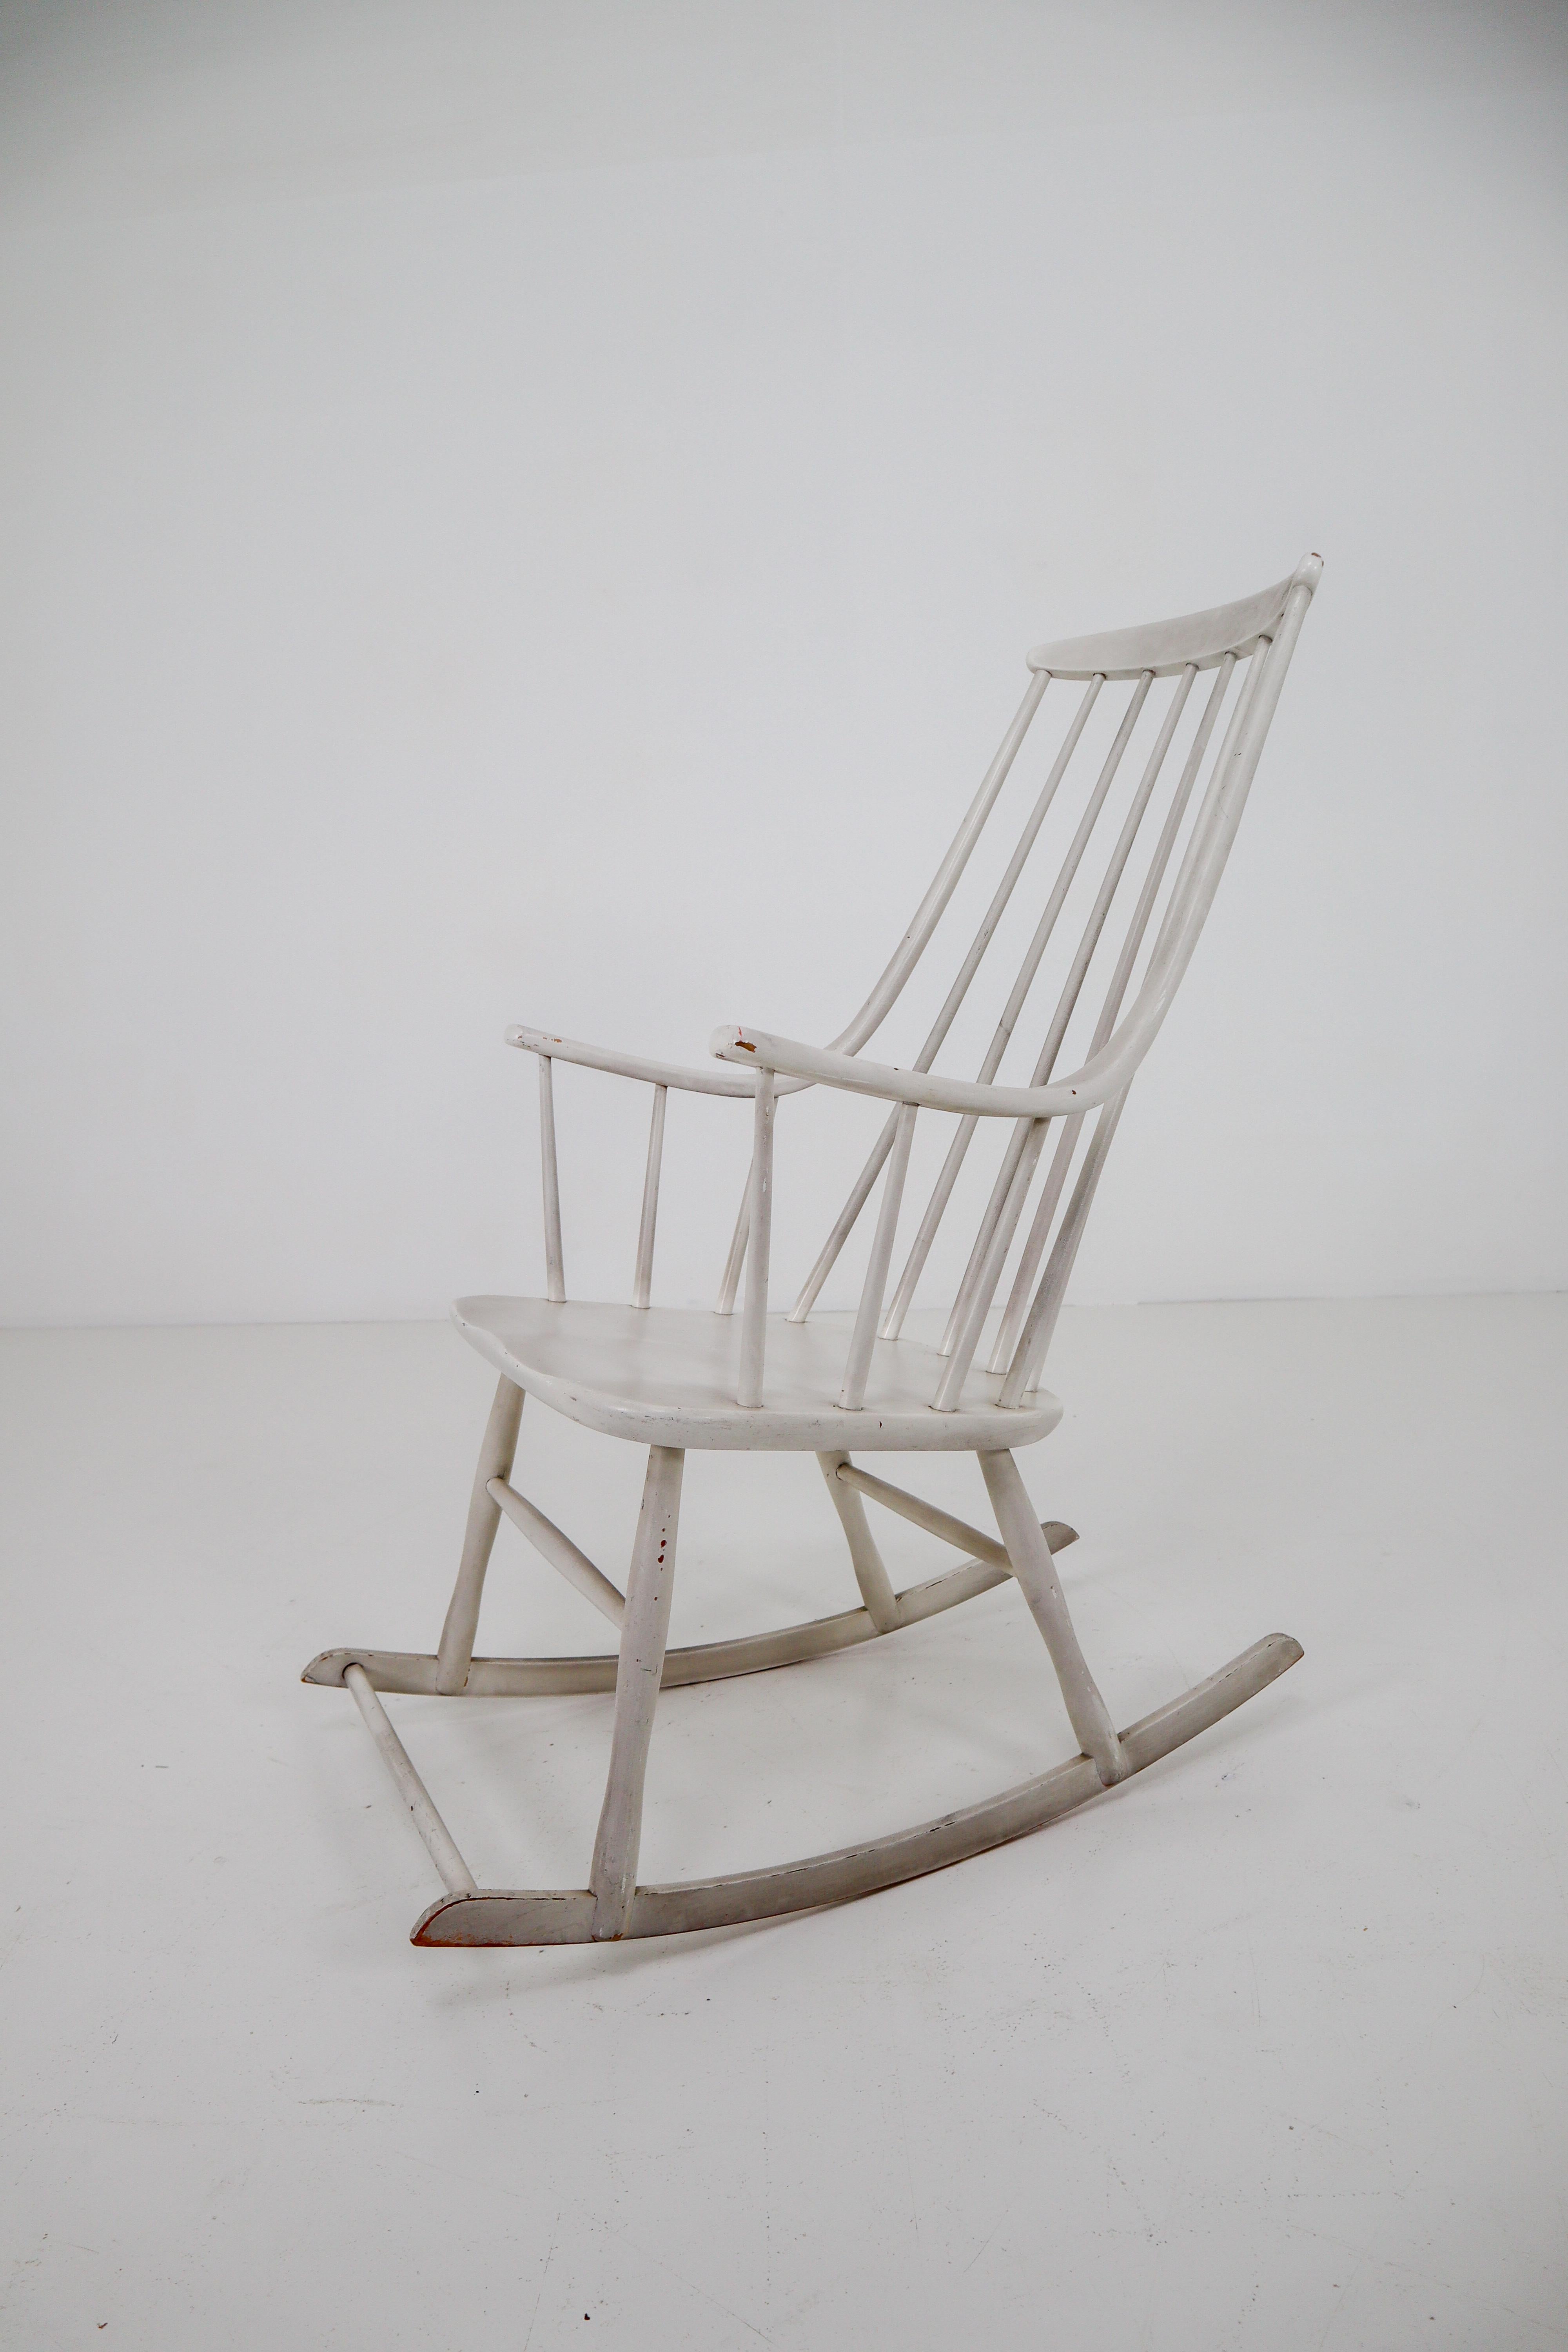 Wonderful French rocking produced in the 1950s, in light-gray-white painted beech with solid wood seat, features a tall spindle back, gracefully curvaceous arms and runners. The condition of the rocking chair is very good with minor signs of age and